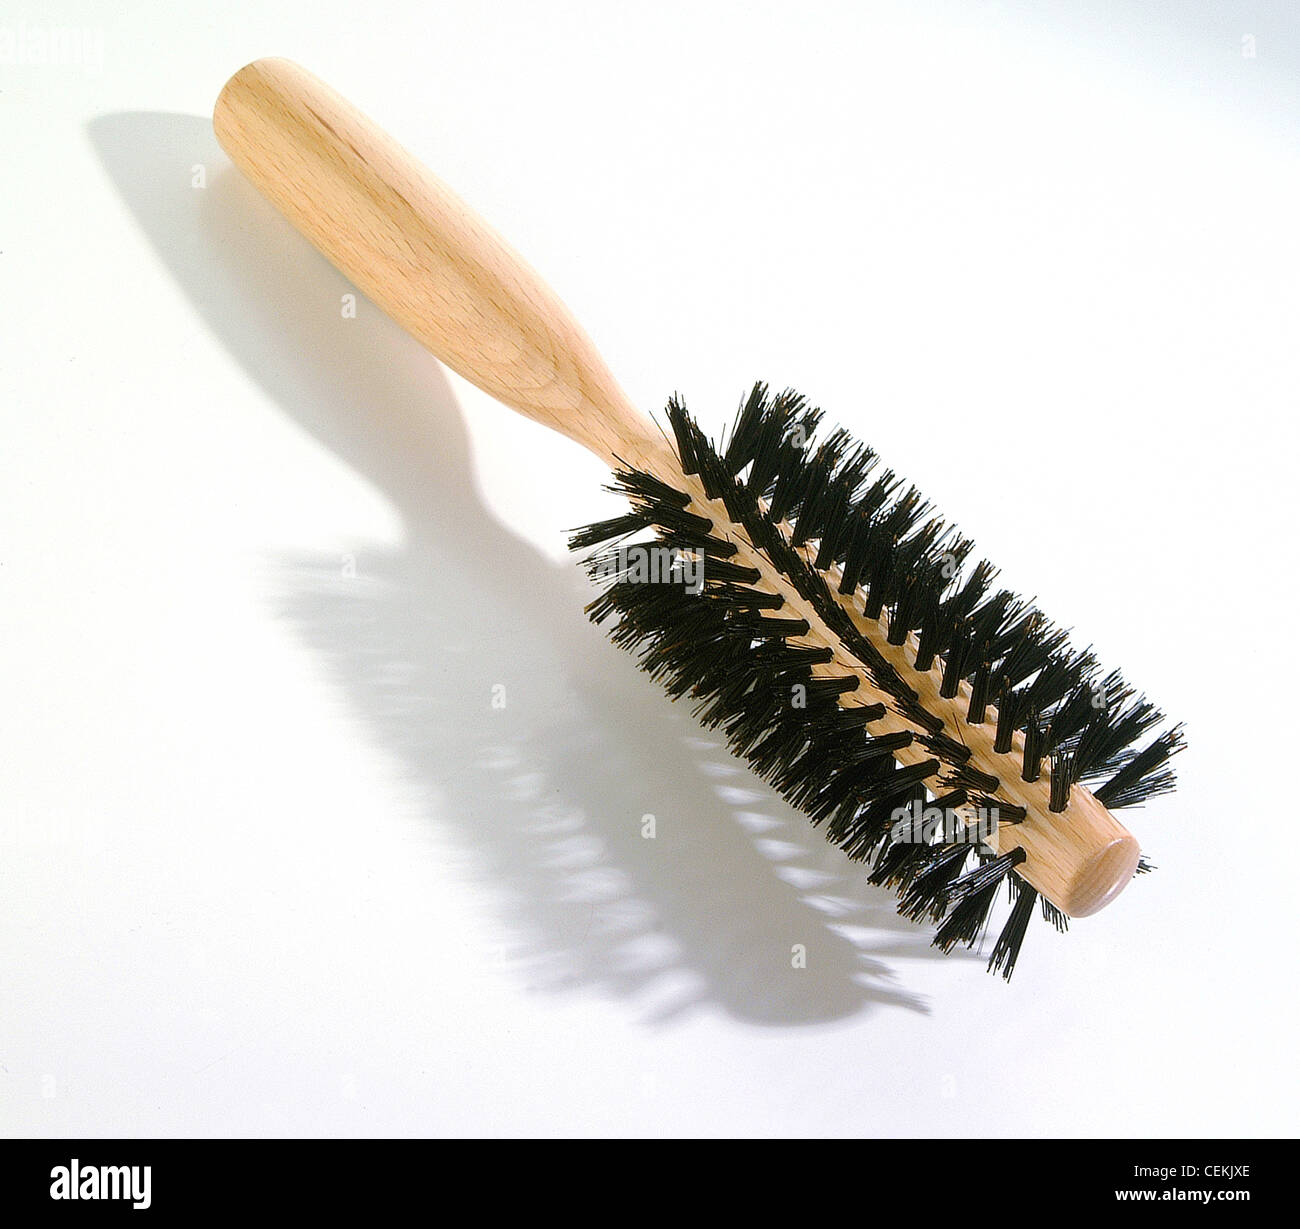 Round hair brush with wooden handle Stock Photo - Alamy